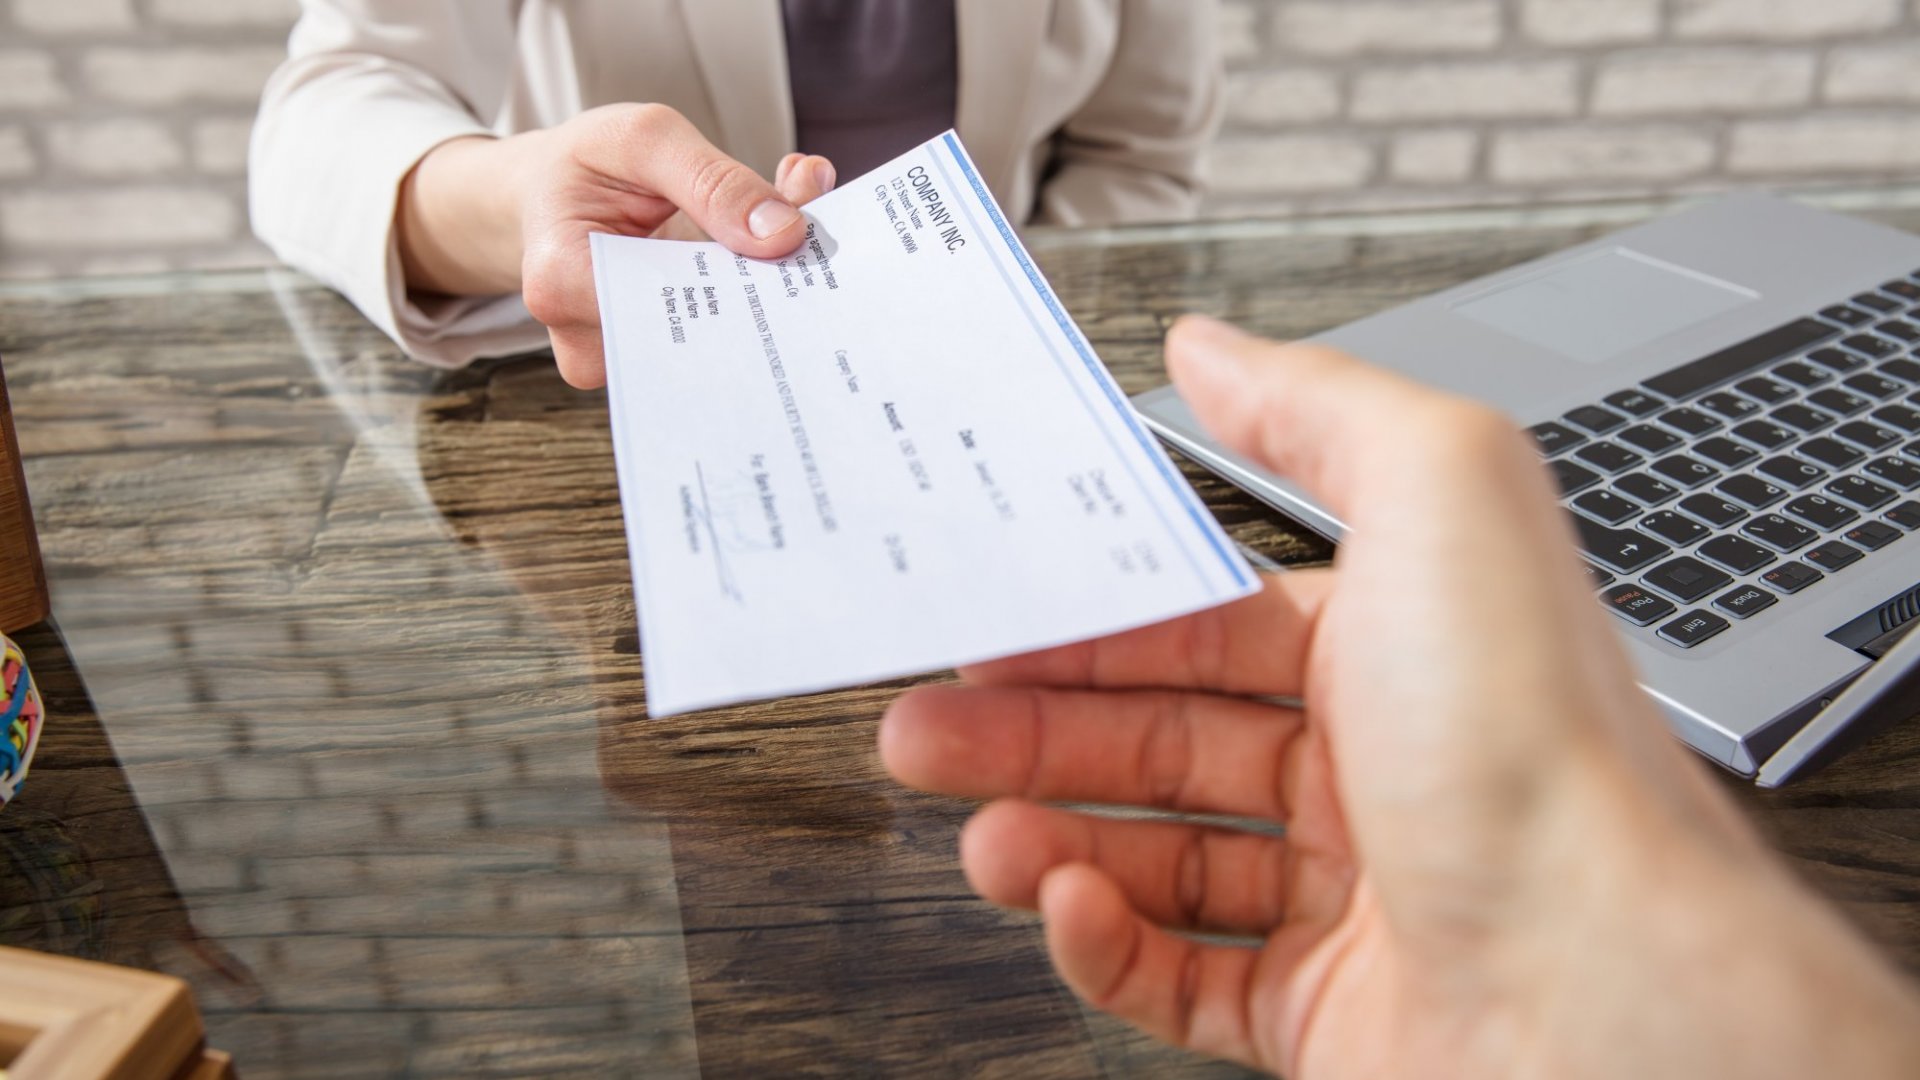 5 Common Mistakes That Can Cause Your Check to Bounce